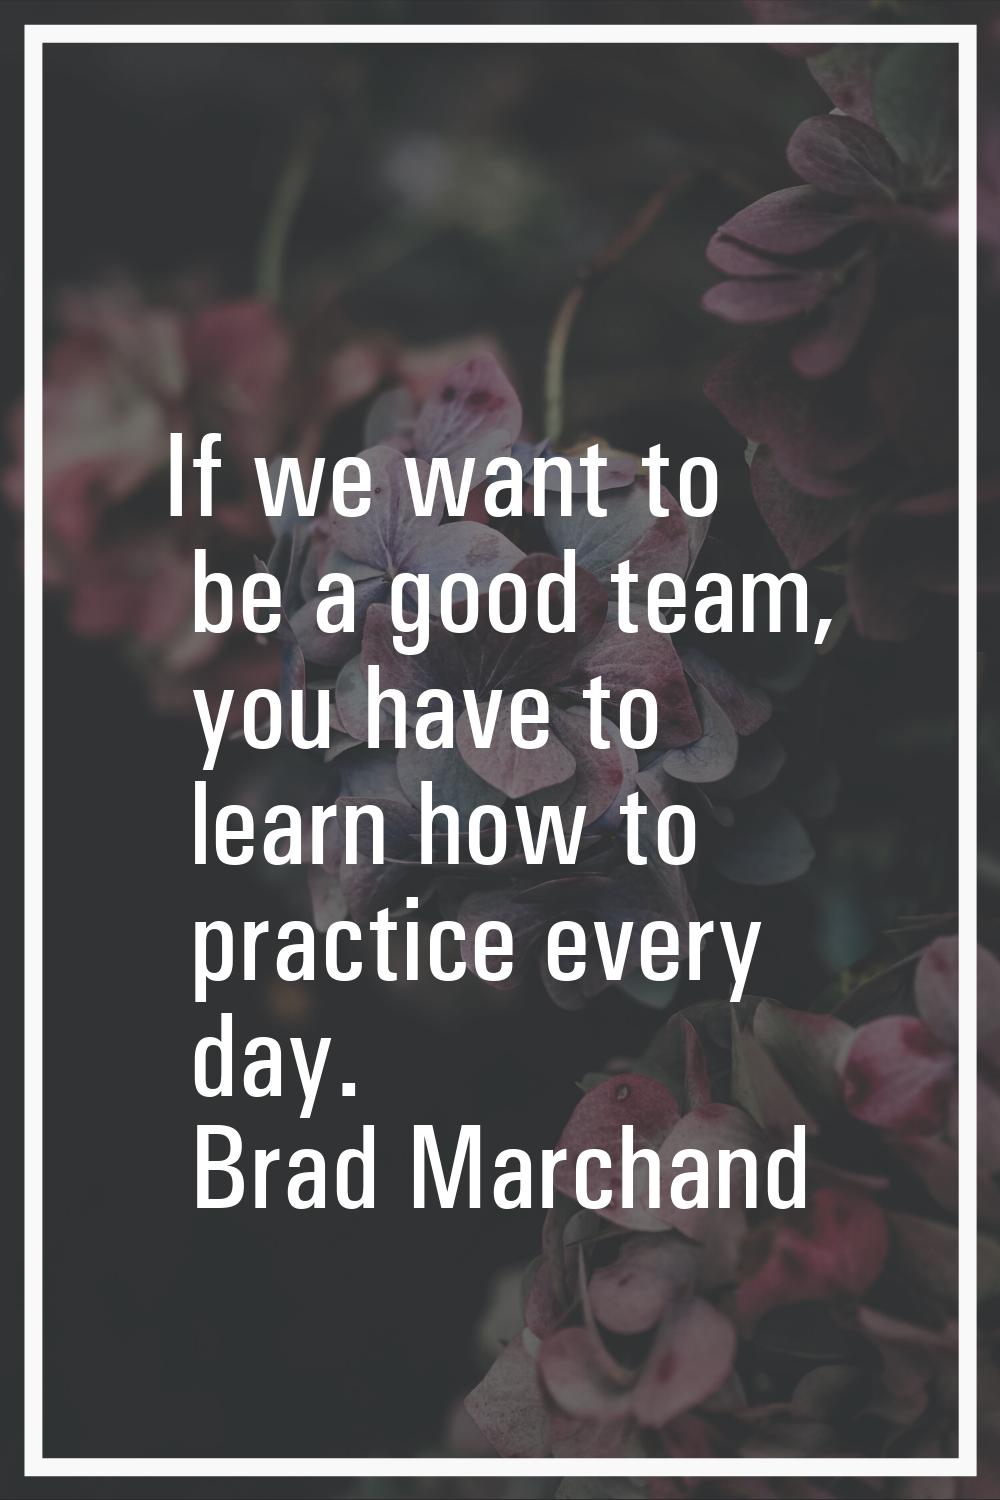 If we want to be a good team, you have to learn how to practice every day.